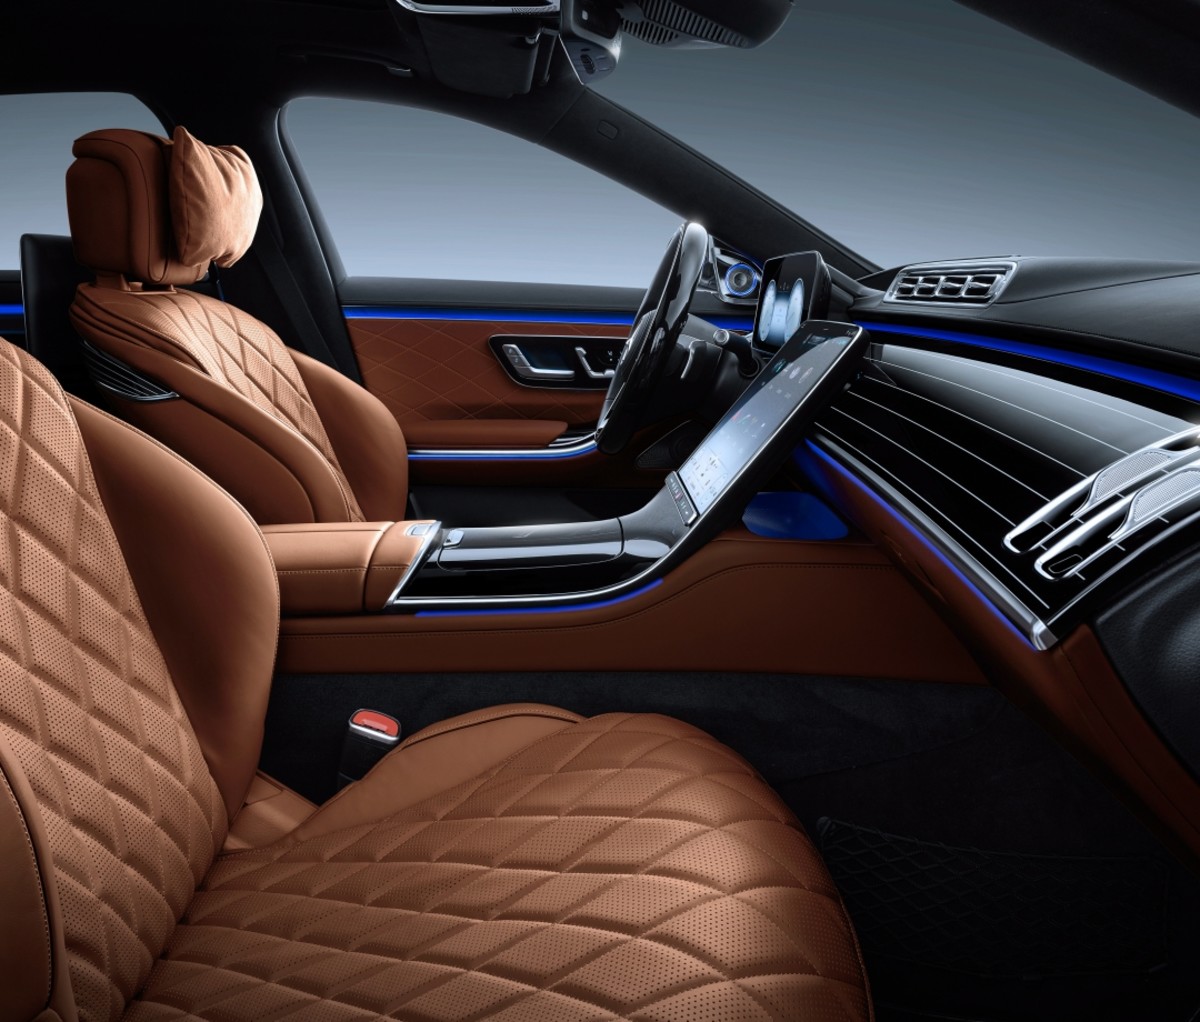 The brown leather interior of the 2021 Mercedes-Benz S-Class